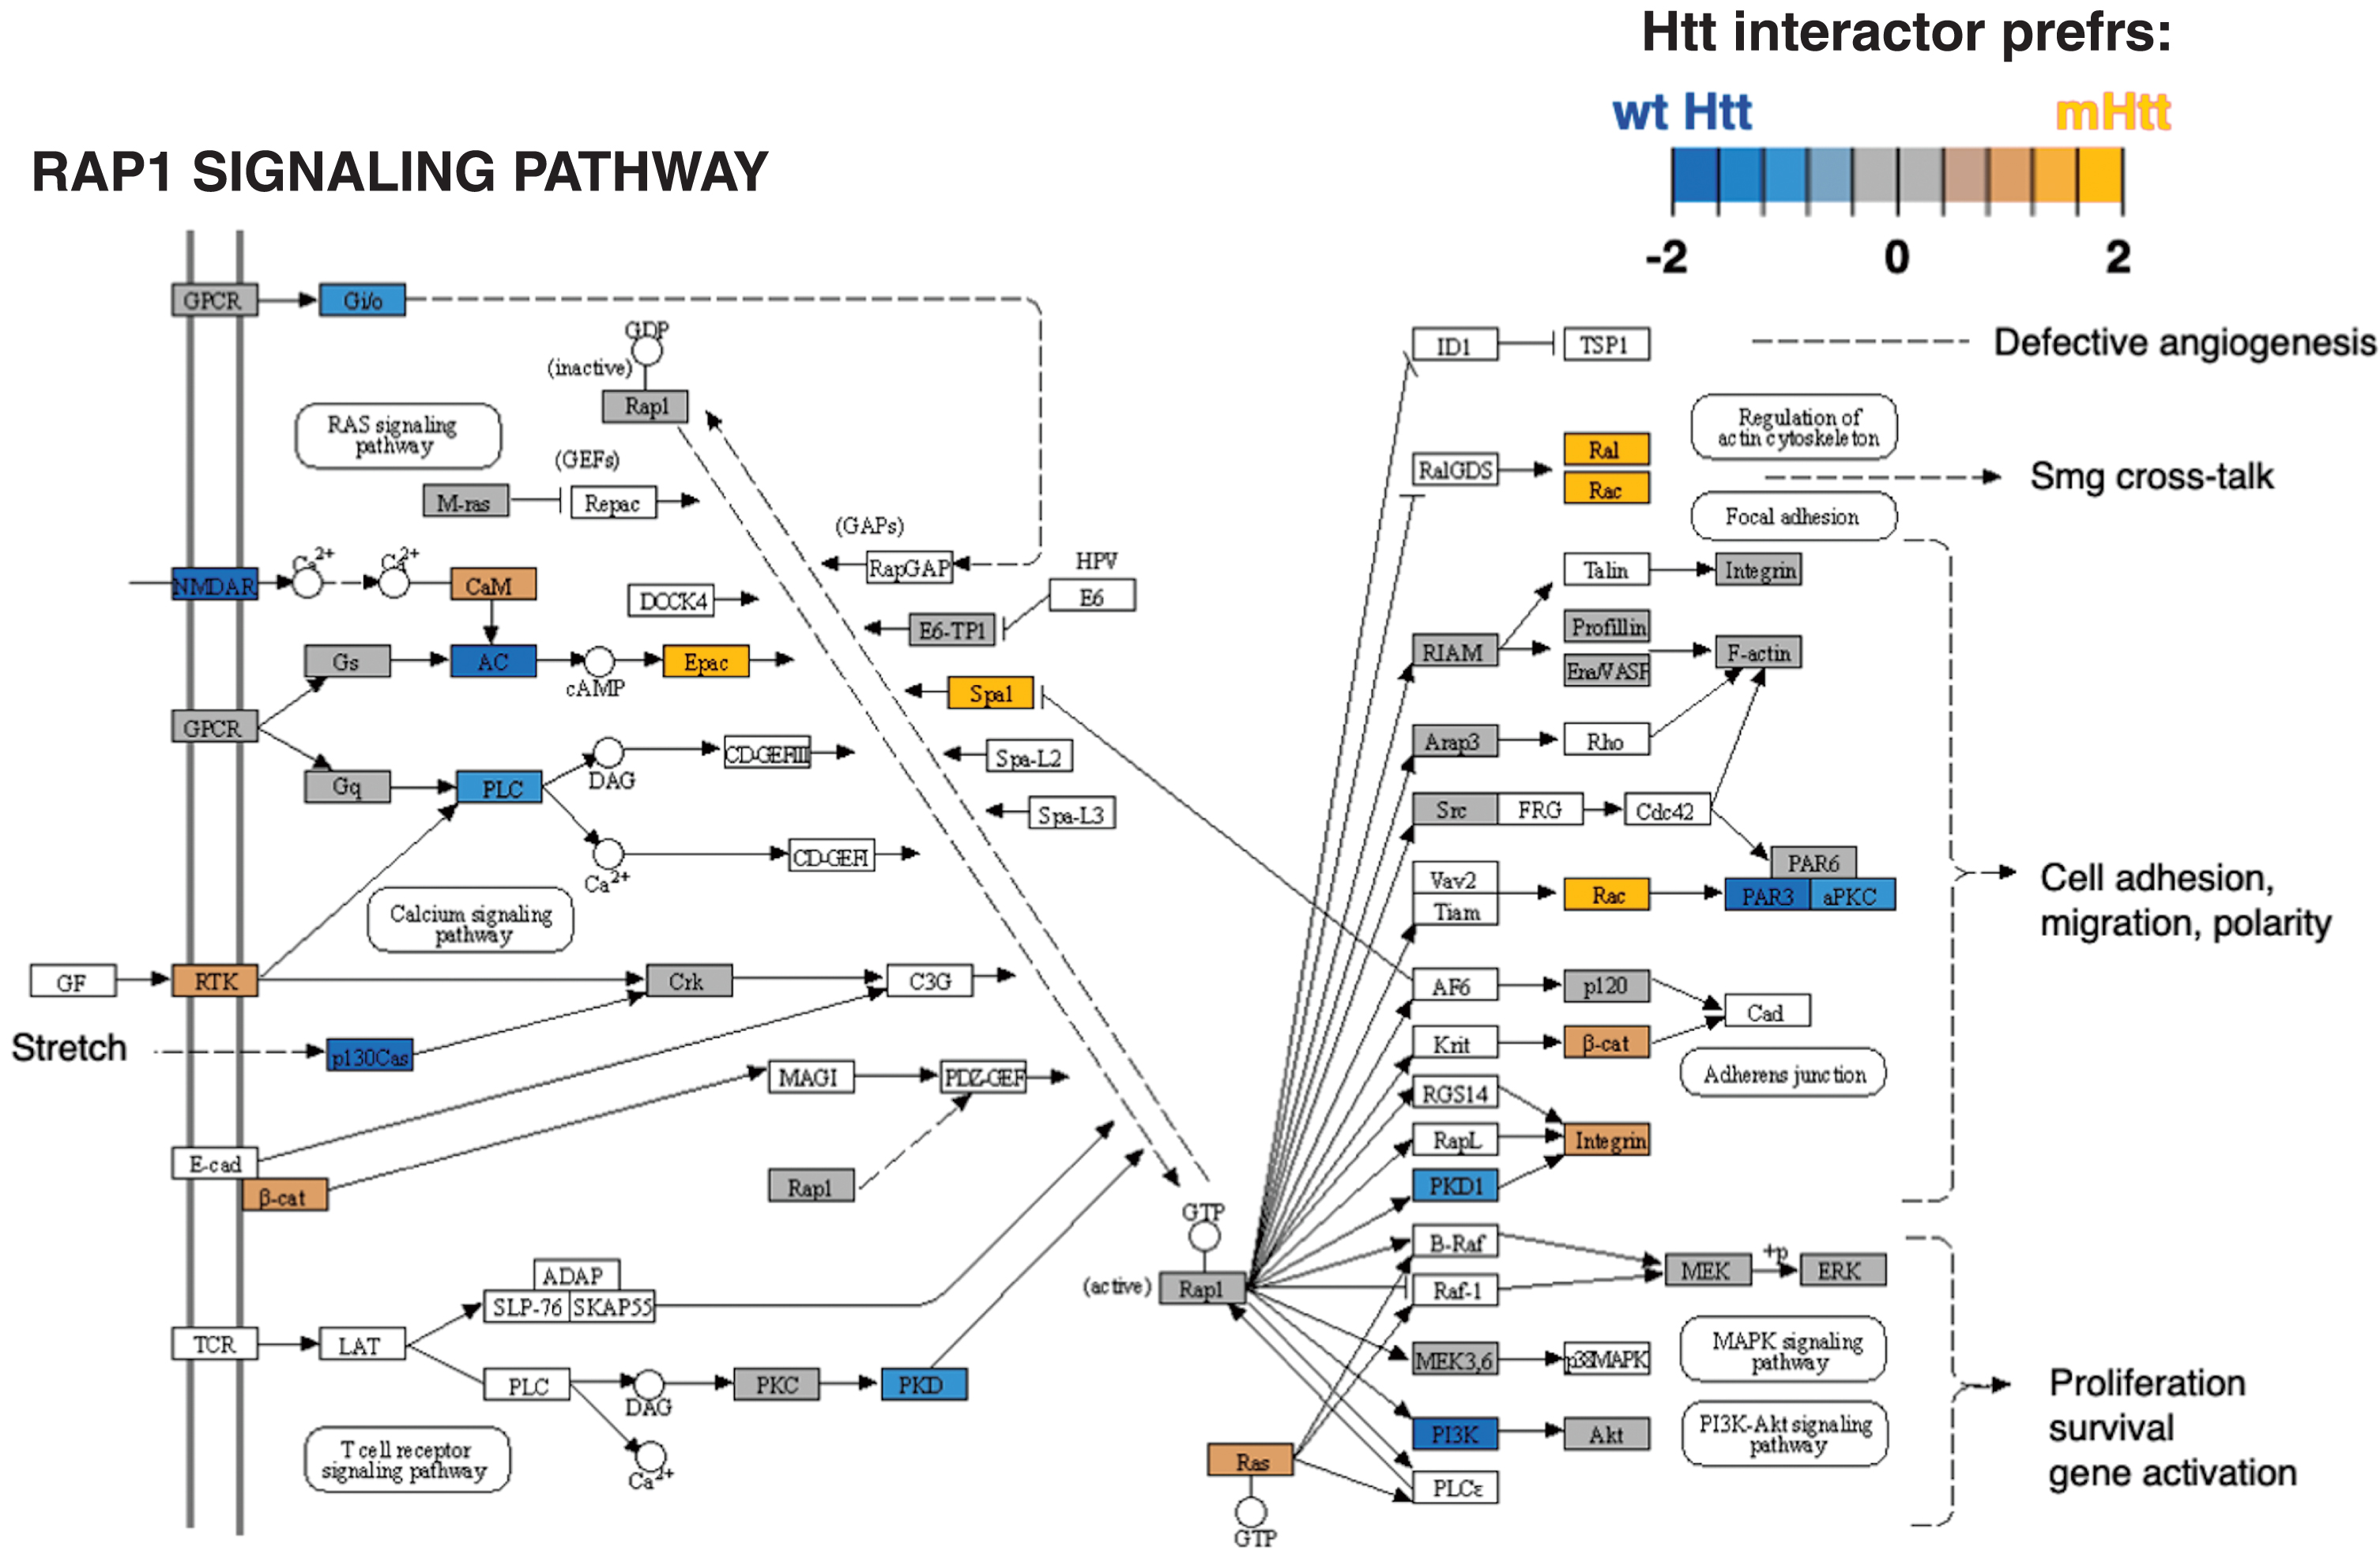 Rap1 signaling KEGG pathway of the signal transduction cluster. The Rap1 signaling pathway represented the top significant pathway of the signal transduction cluster (Supplementary Table 2). Preferred interactions of mutant Htt (mHtt) or wt Htt with pathway components are illustrated by the red to blue color color key.